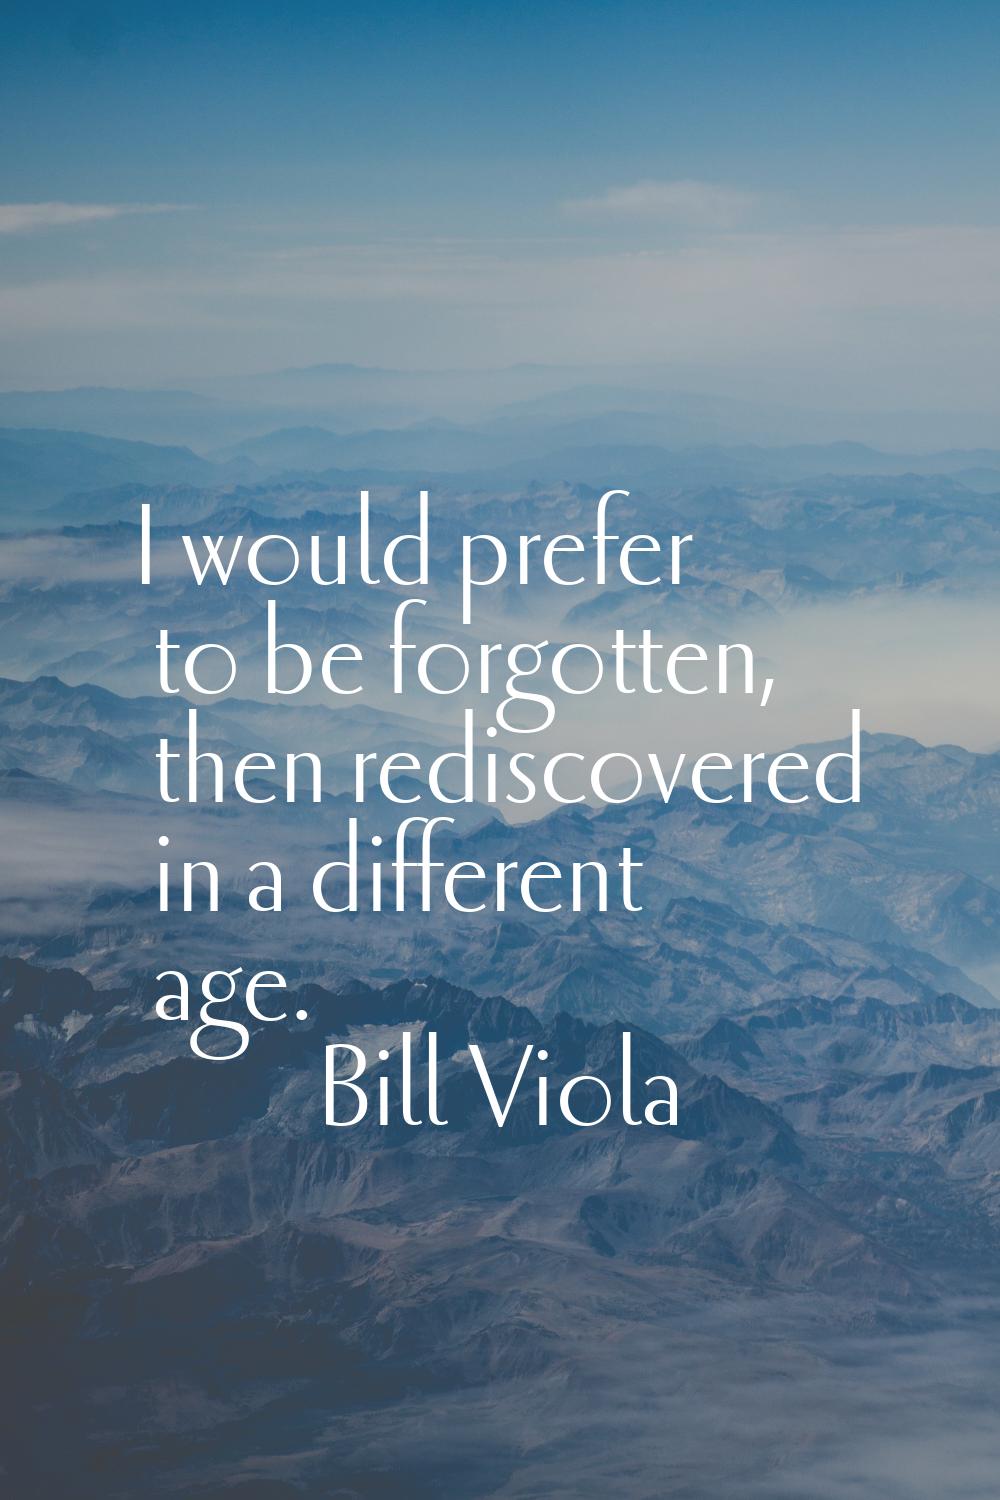 I would prefer to be forgotten, then rediscovered in a different age.